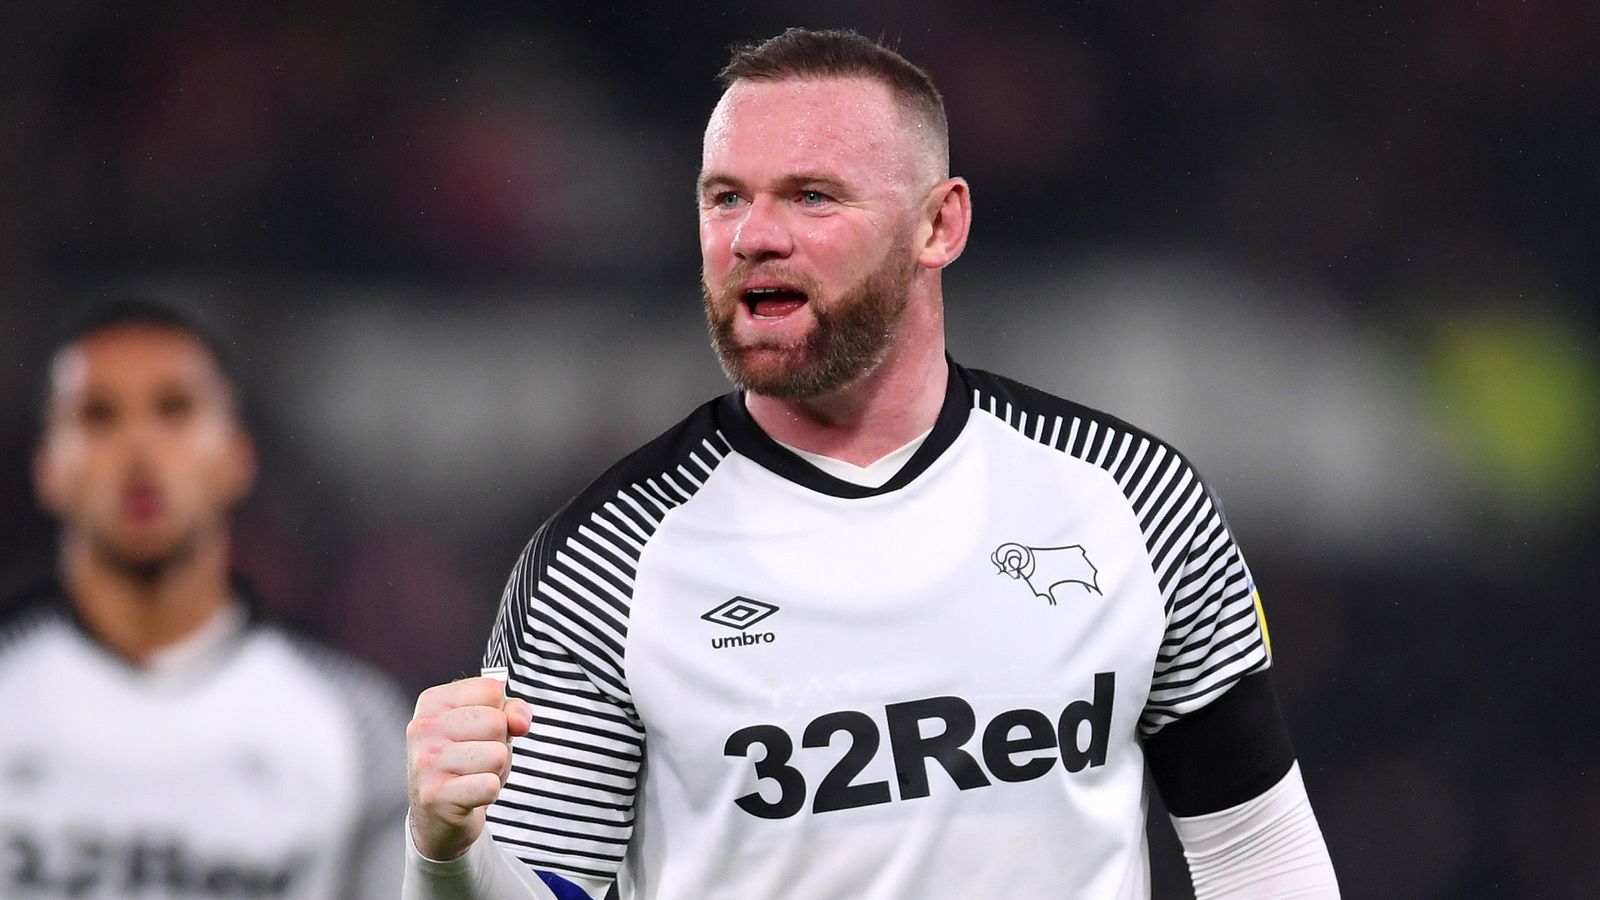 Wayne Rooney wanted to face Manchester United in FA Cup with Derby